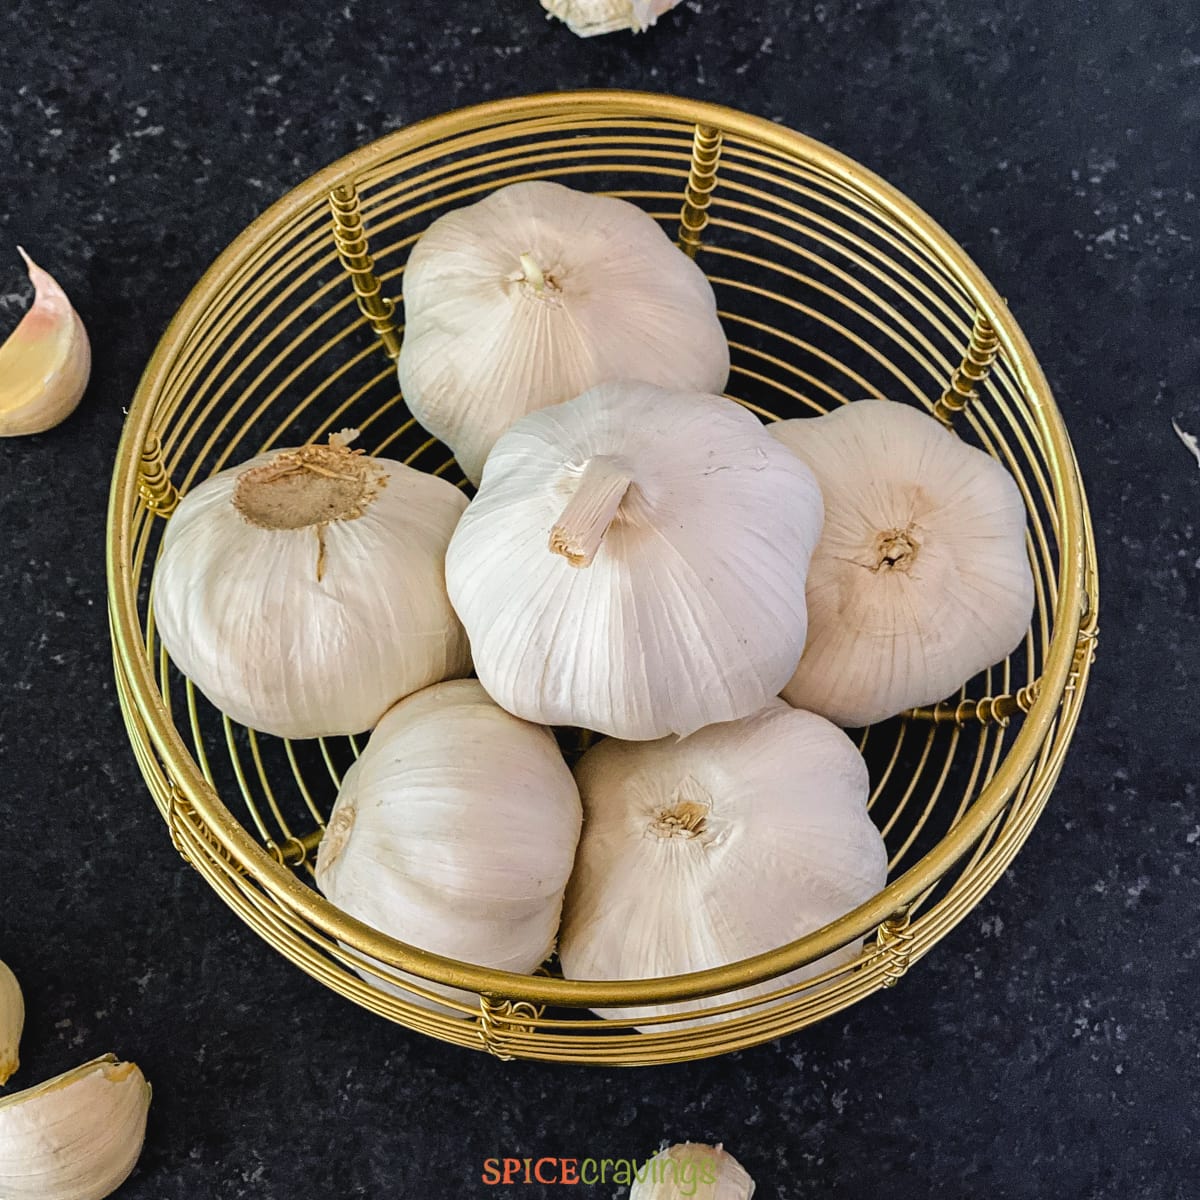 https://spicecravings.com/wp-content/uploads/2021/05/How-to-Store-Garlic-Featured-1.jpg